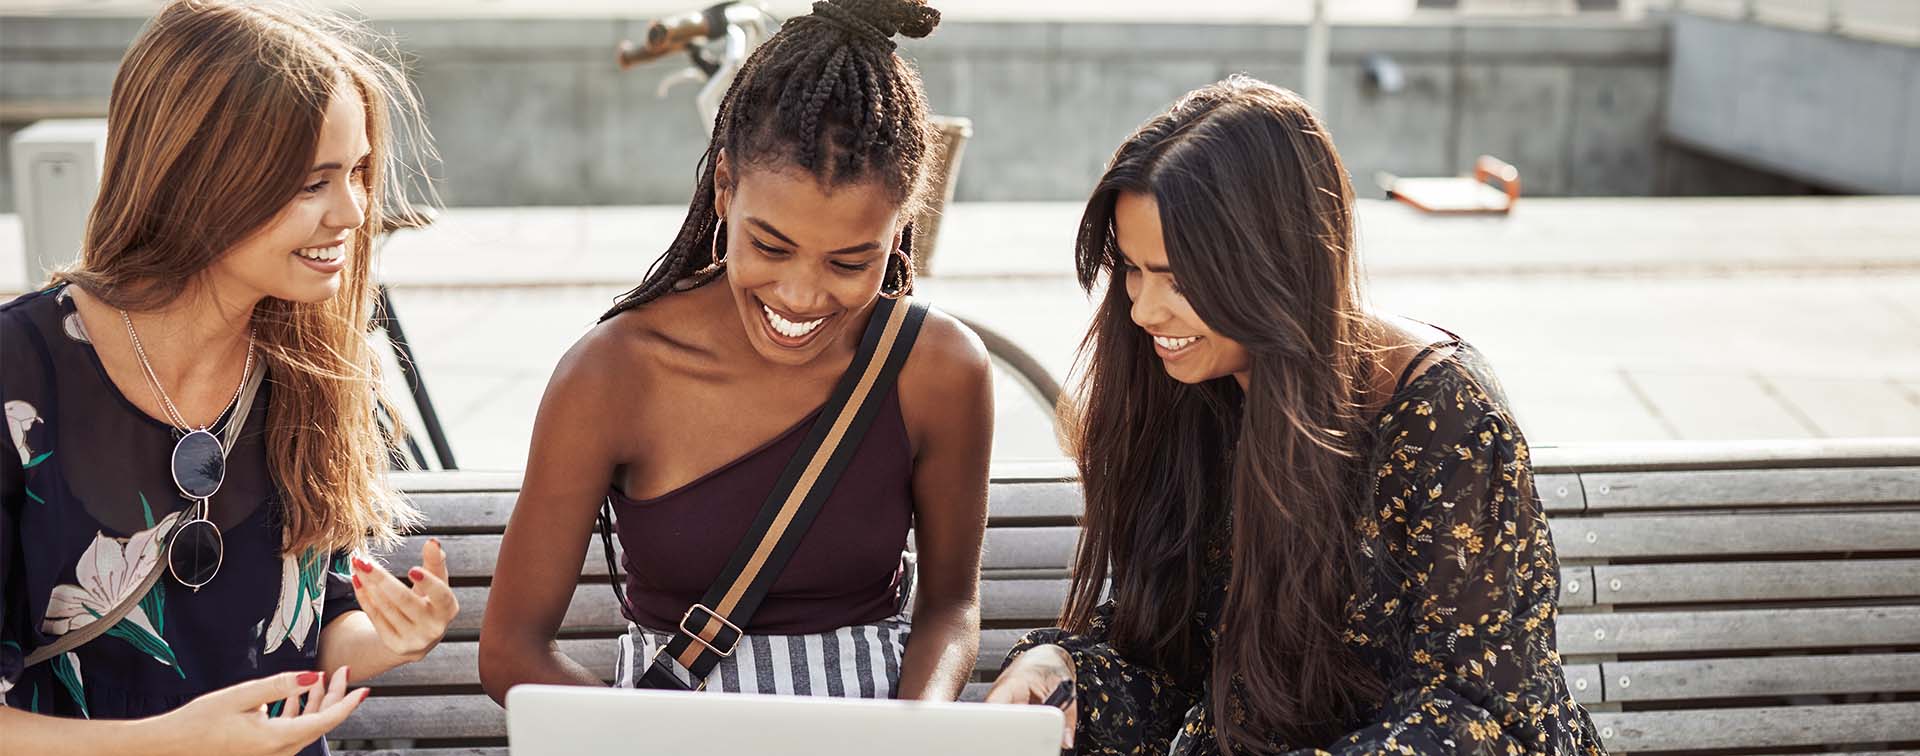 Three young female university students smiling while looking at a laptop on a bench outside